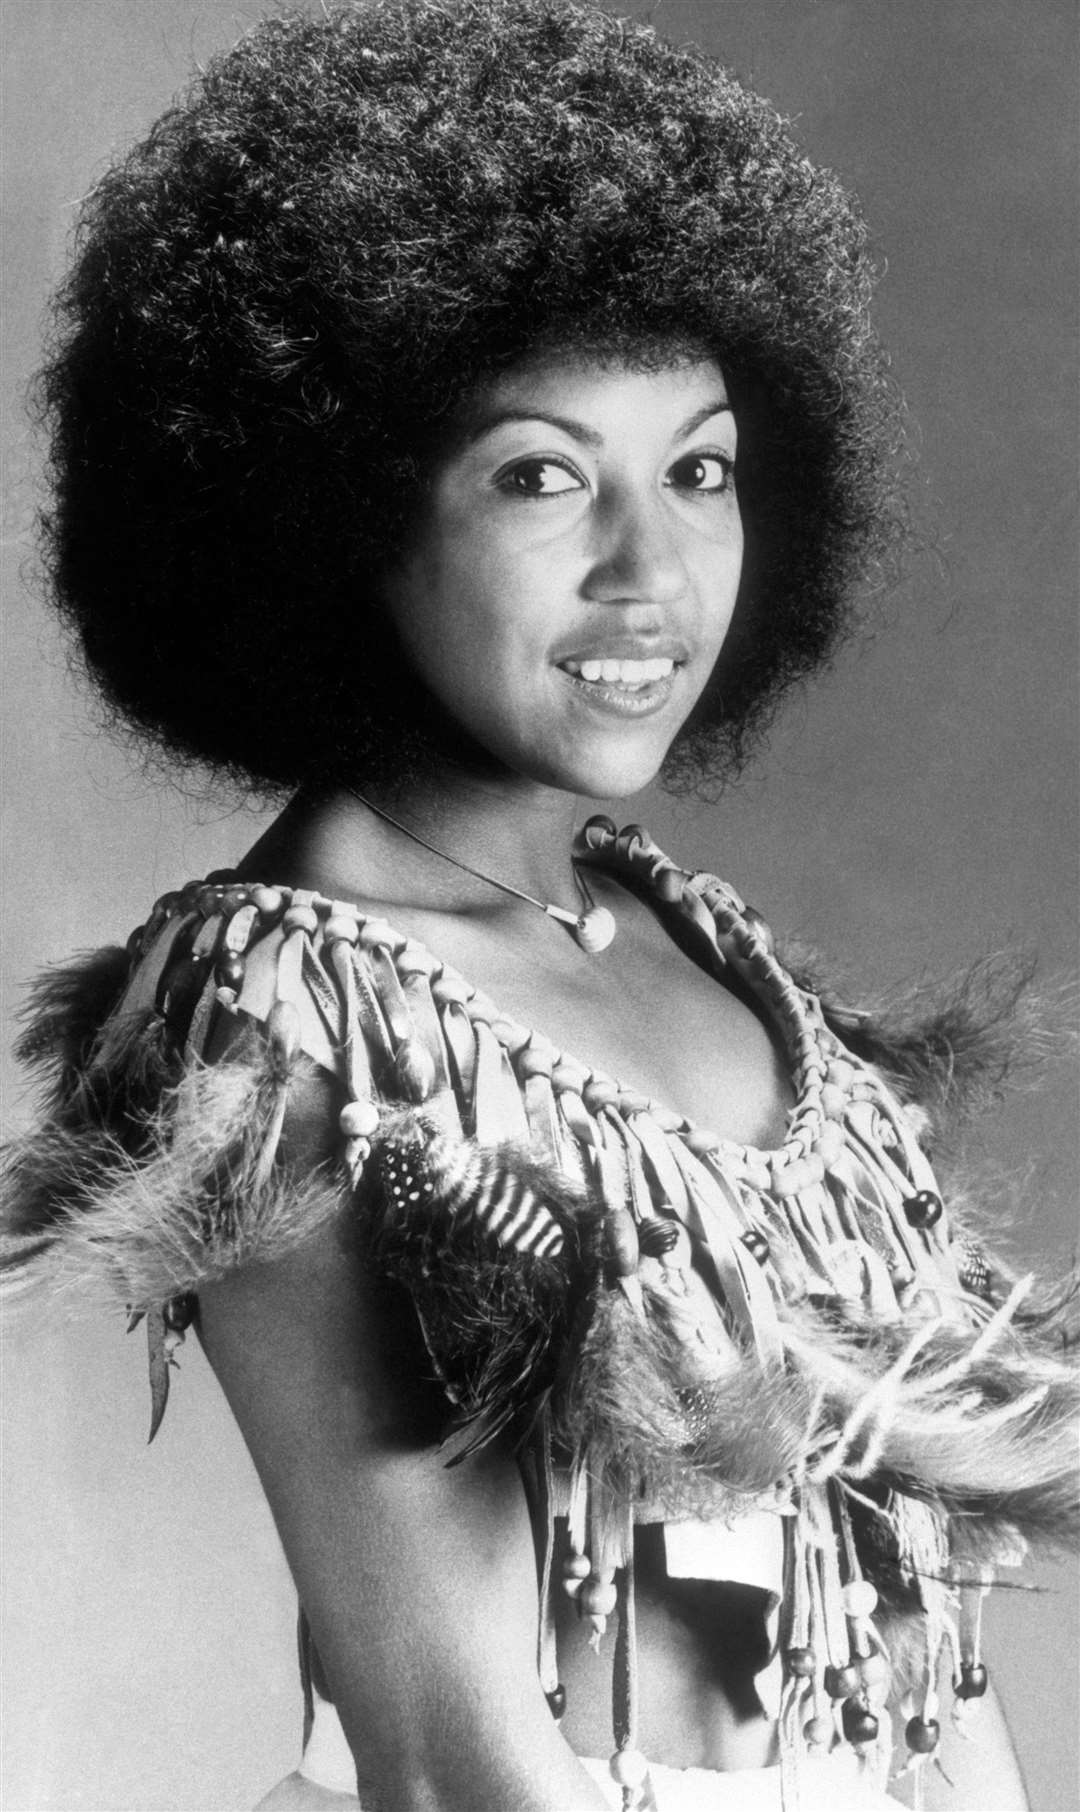 Linda Lewis had a hit with It’s In His Kiss and was voted Best Female Artist for 1975 in a poll conducted by London Weekend TV (PA)